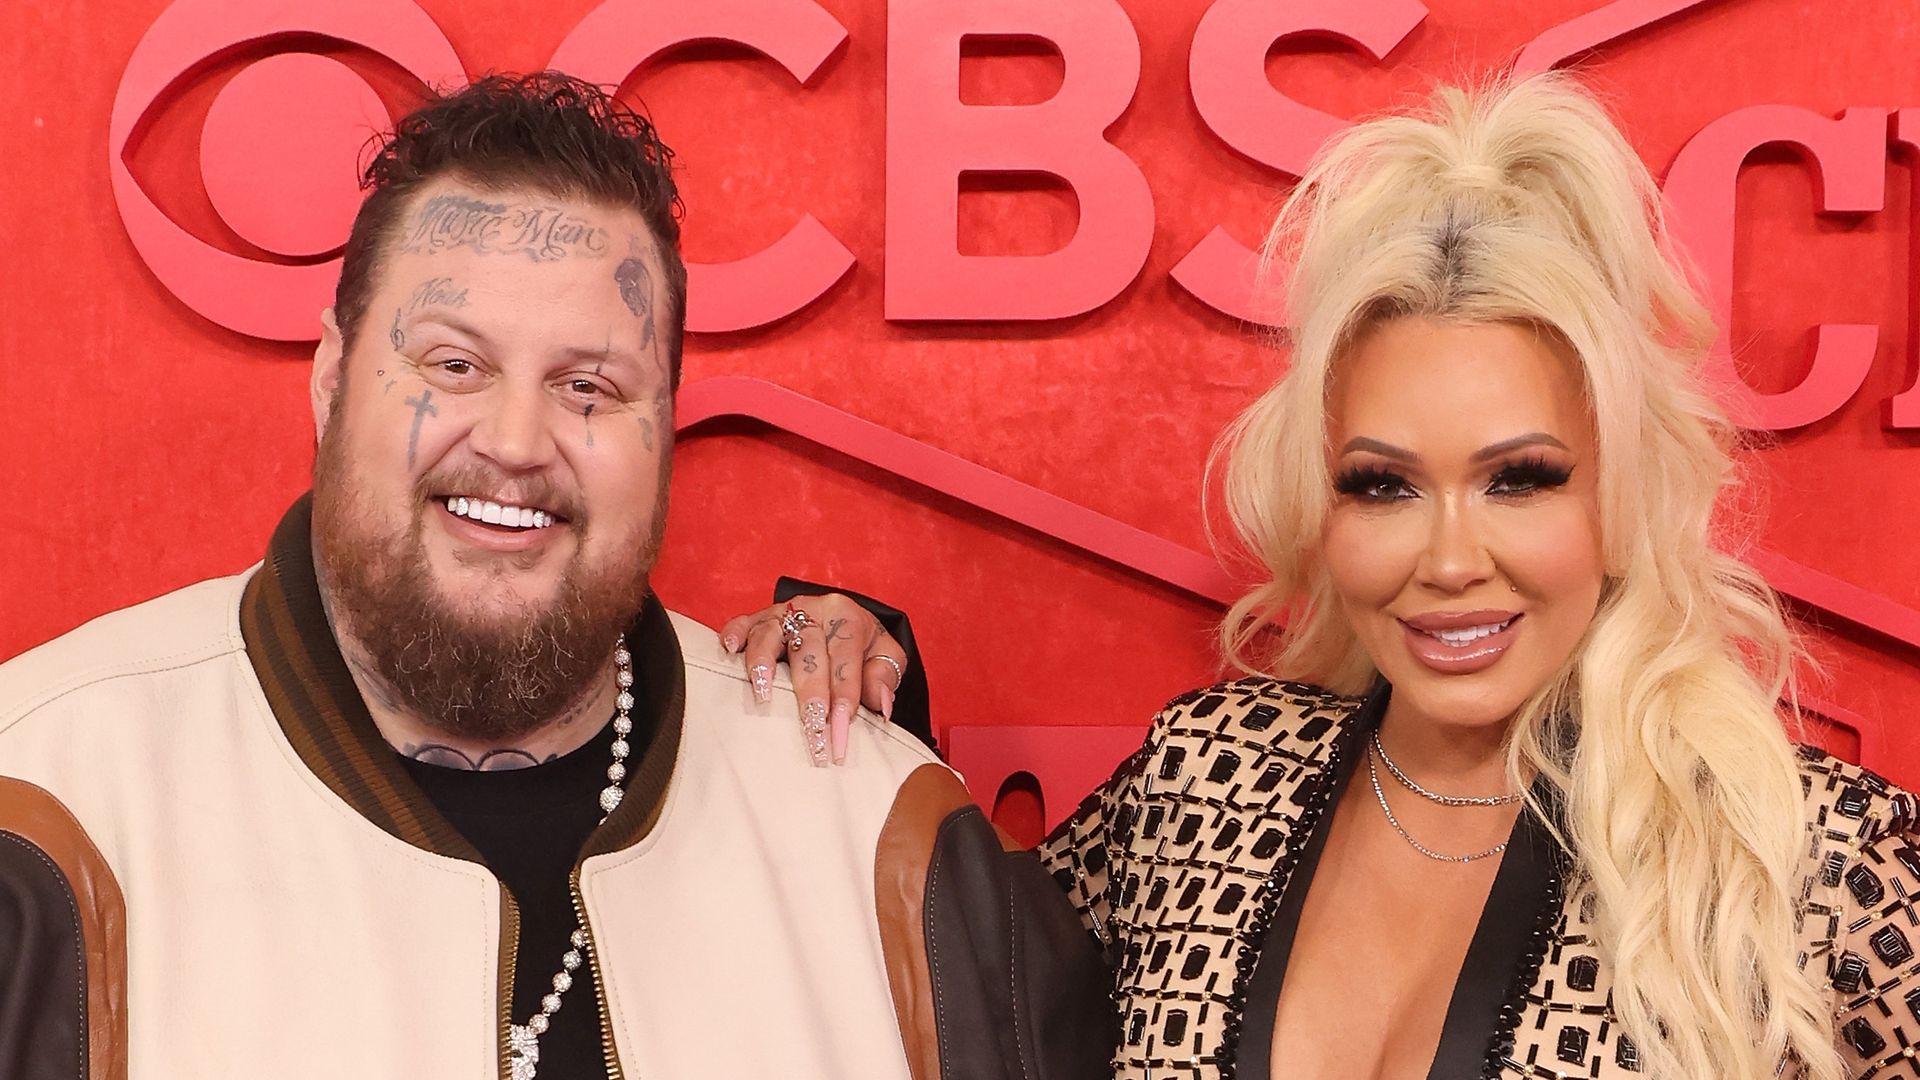 How did Jelly Roll meet his wife? Their complicated first encounter revealed